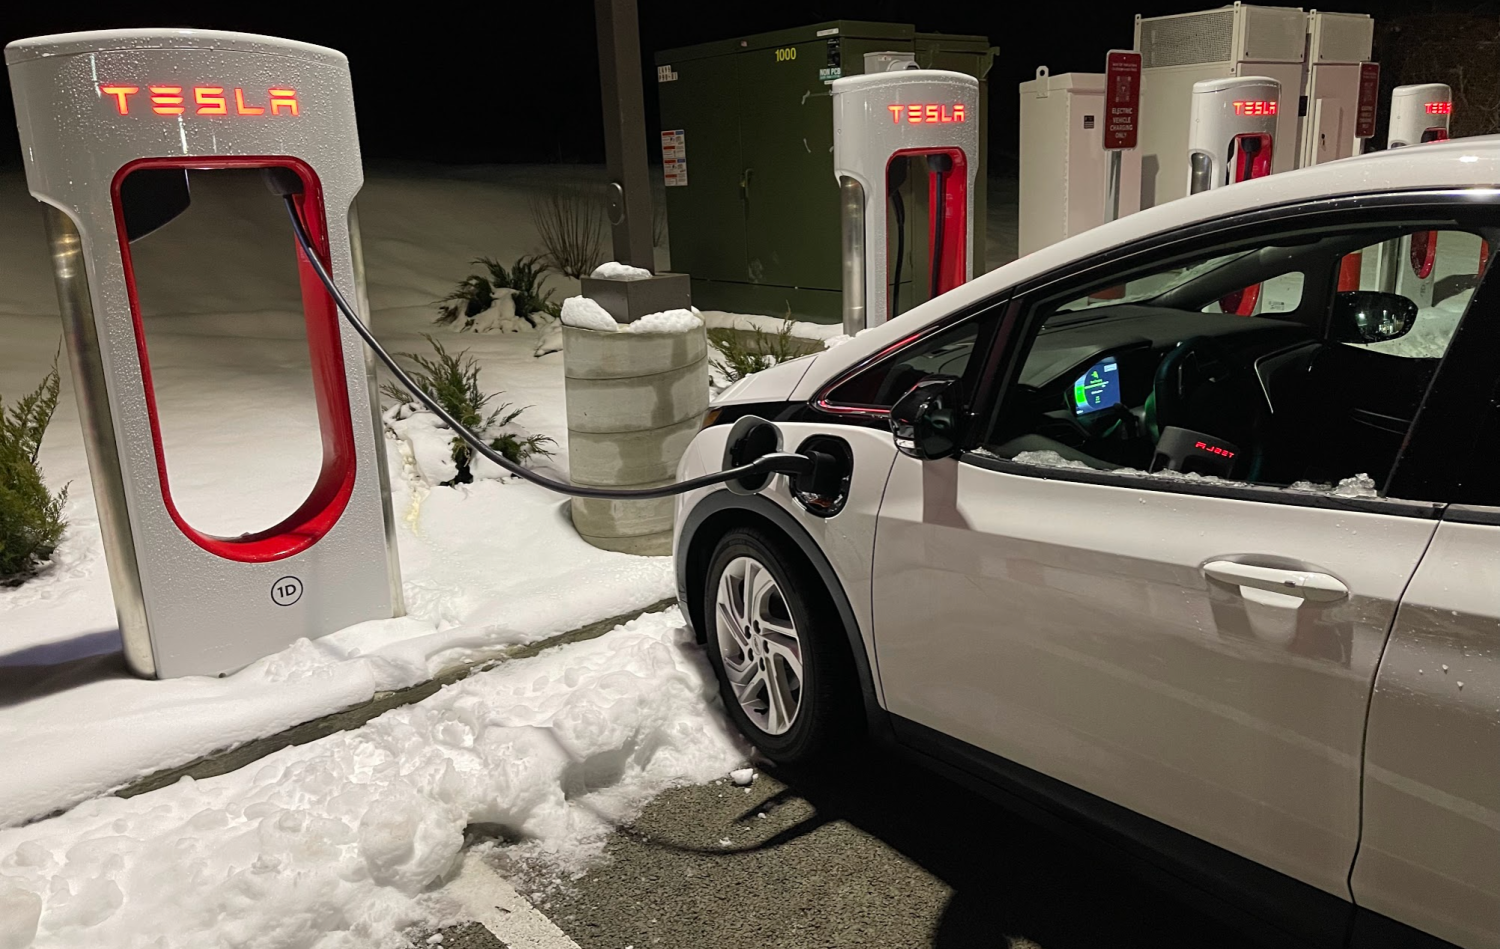 World first! Charging a Chevy Bolt EV on a Tesla Supercharger using Magic Dock